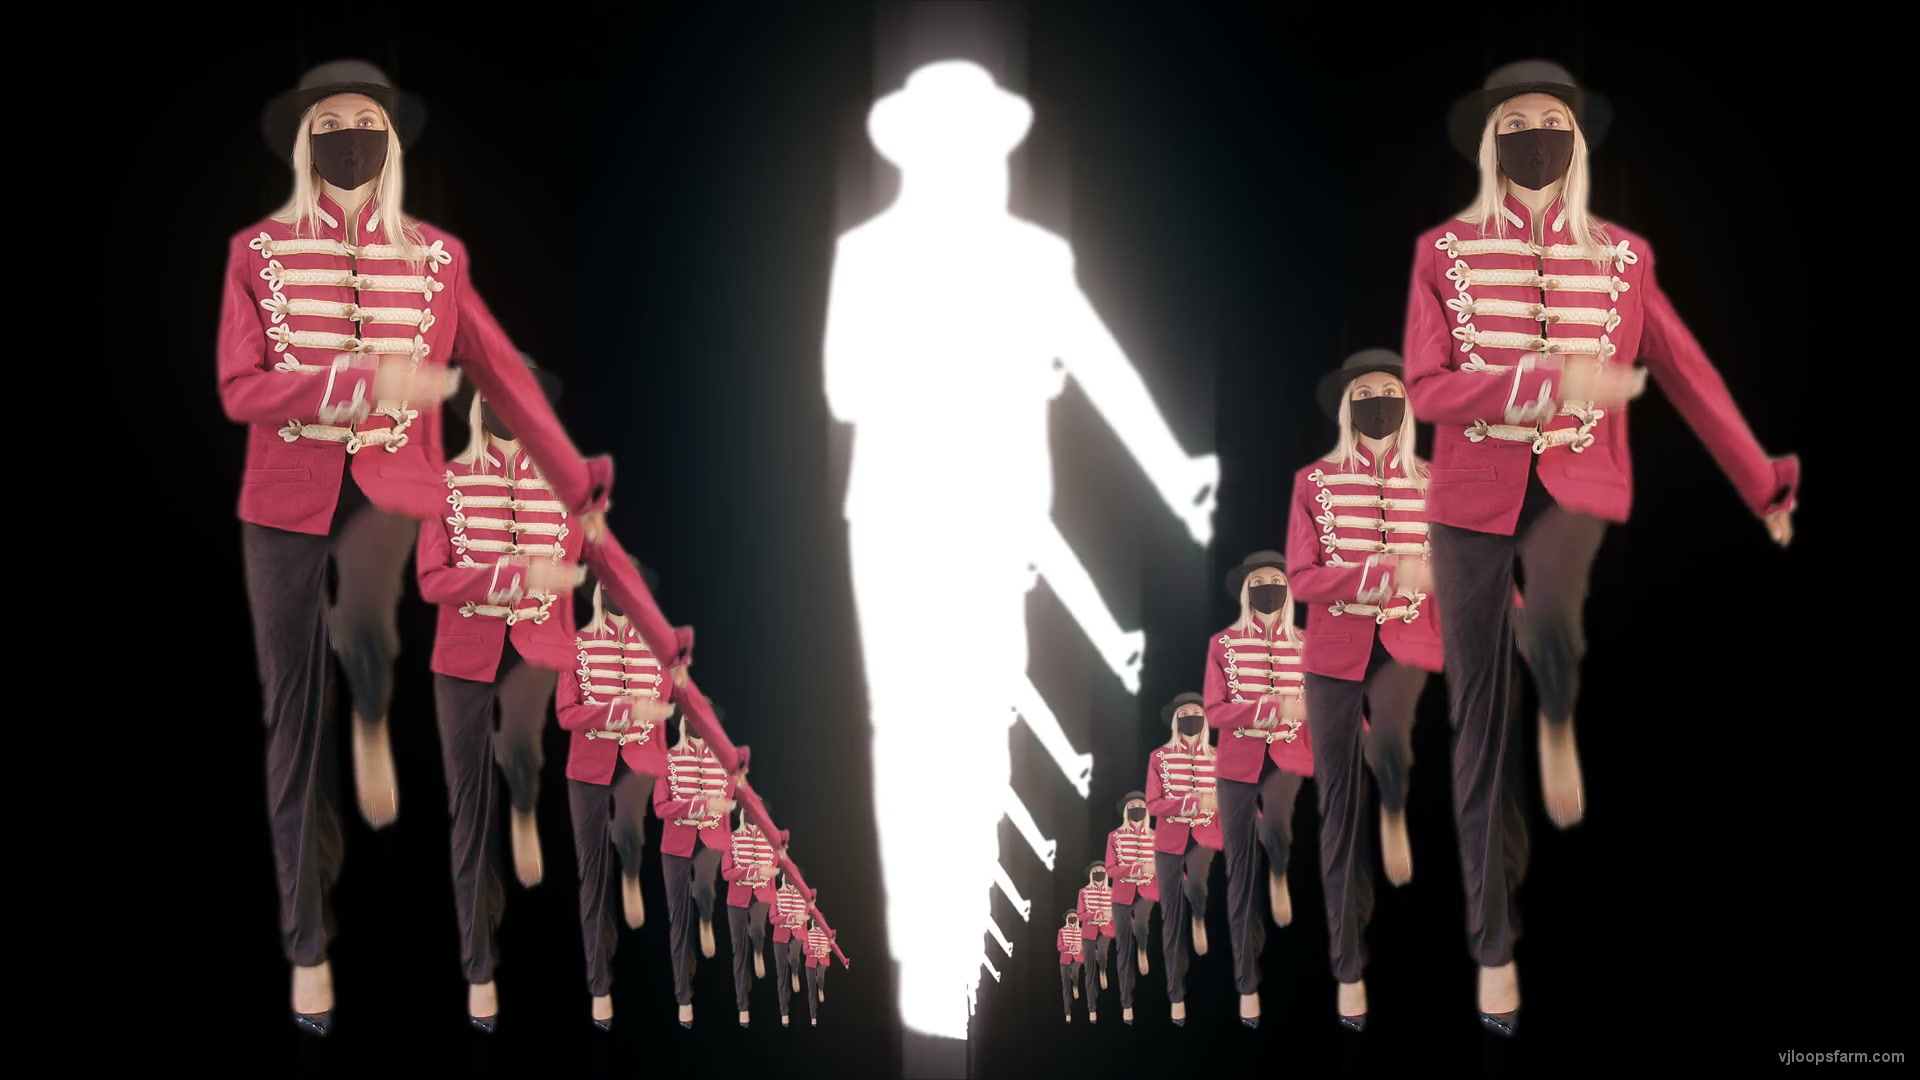 Tunnel Three Red Girls In Mask Empire royal woman marching Video Art 4K VJ Footage Looped